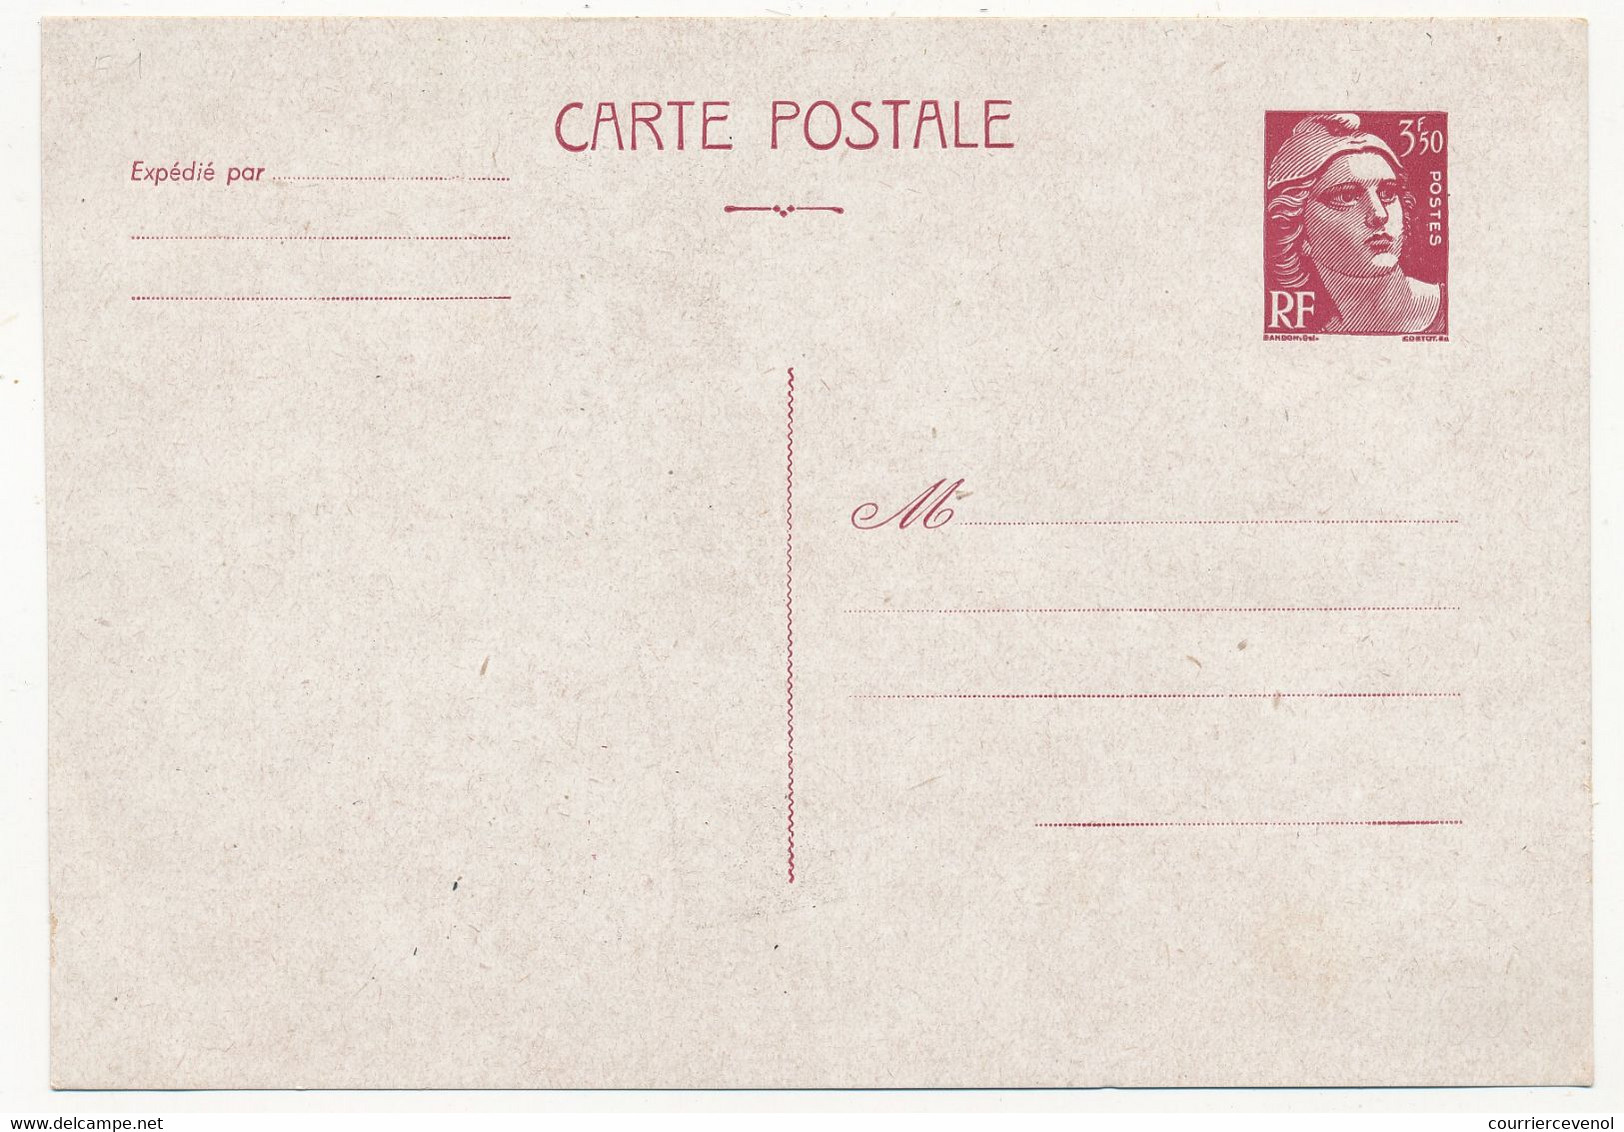 Entier CP 3F50 Type Gandon - Papier Couché - Neuf Et TB - Standard Postcards & Stamped On Demand (before 1995)